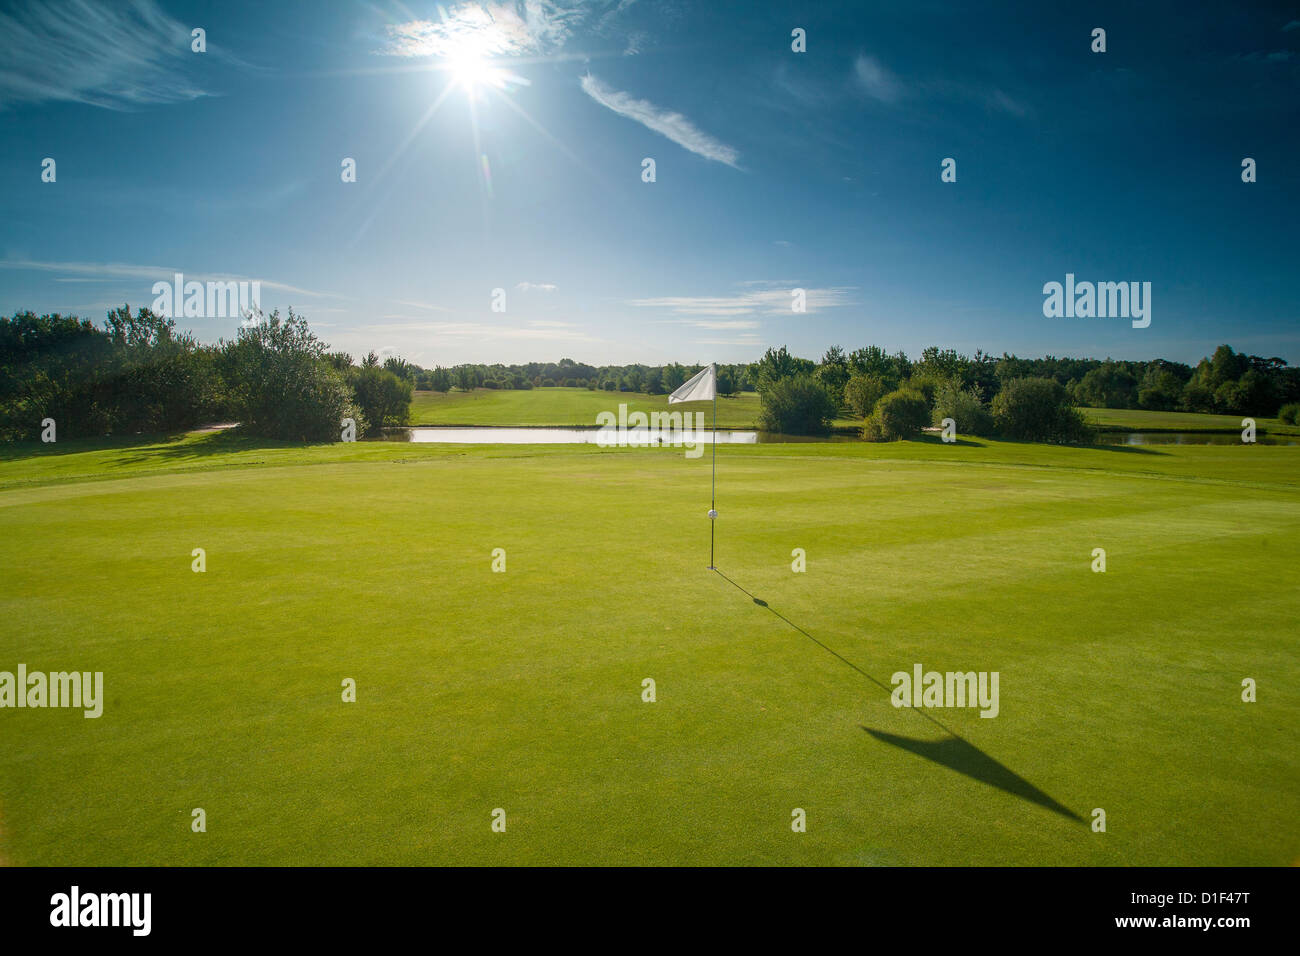 Midday sun over golf course, flag with long shadow. Stock Photo